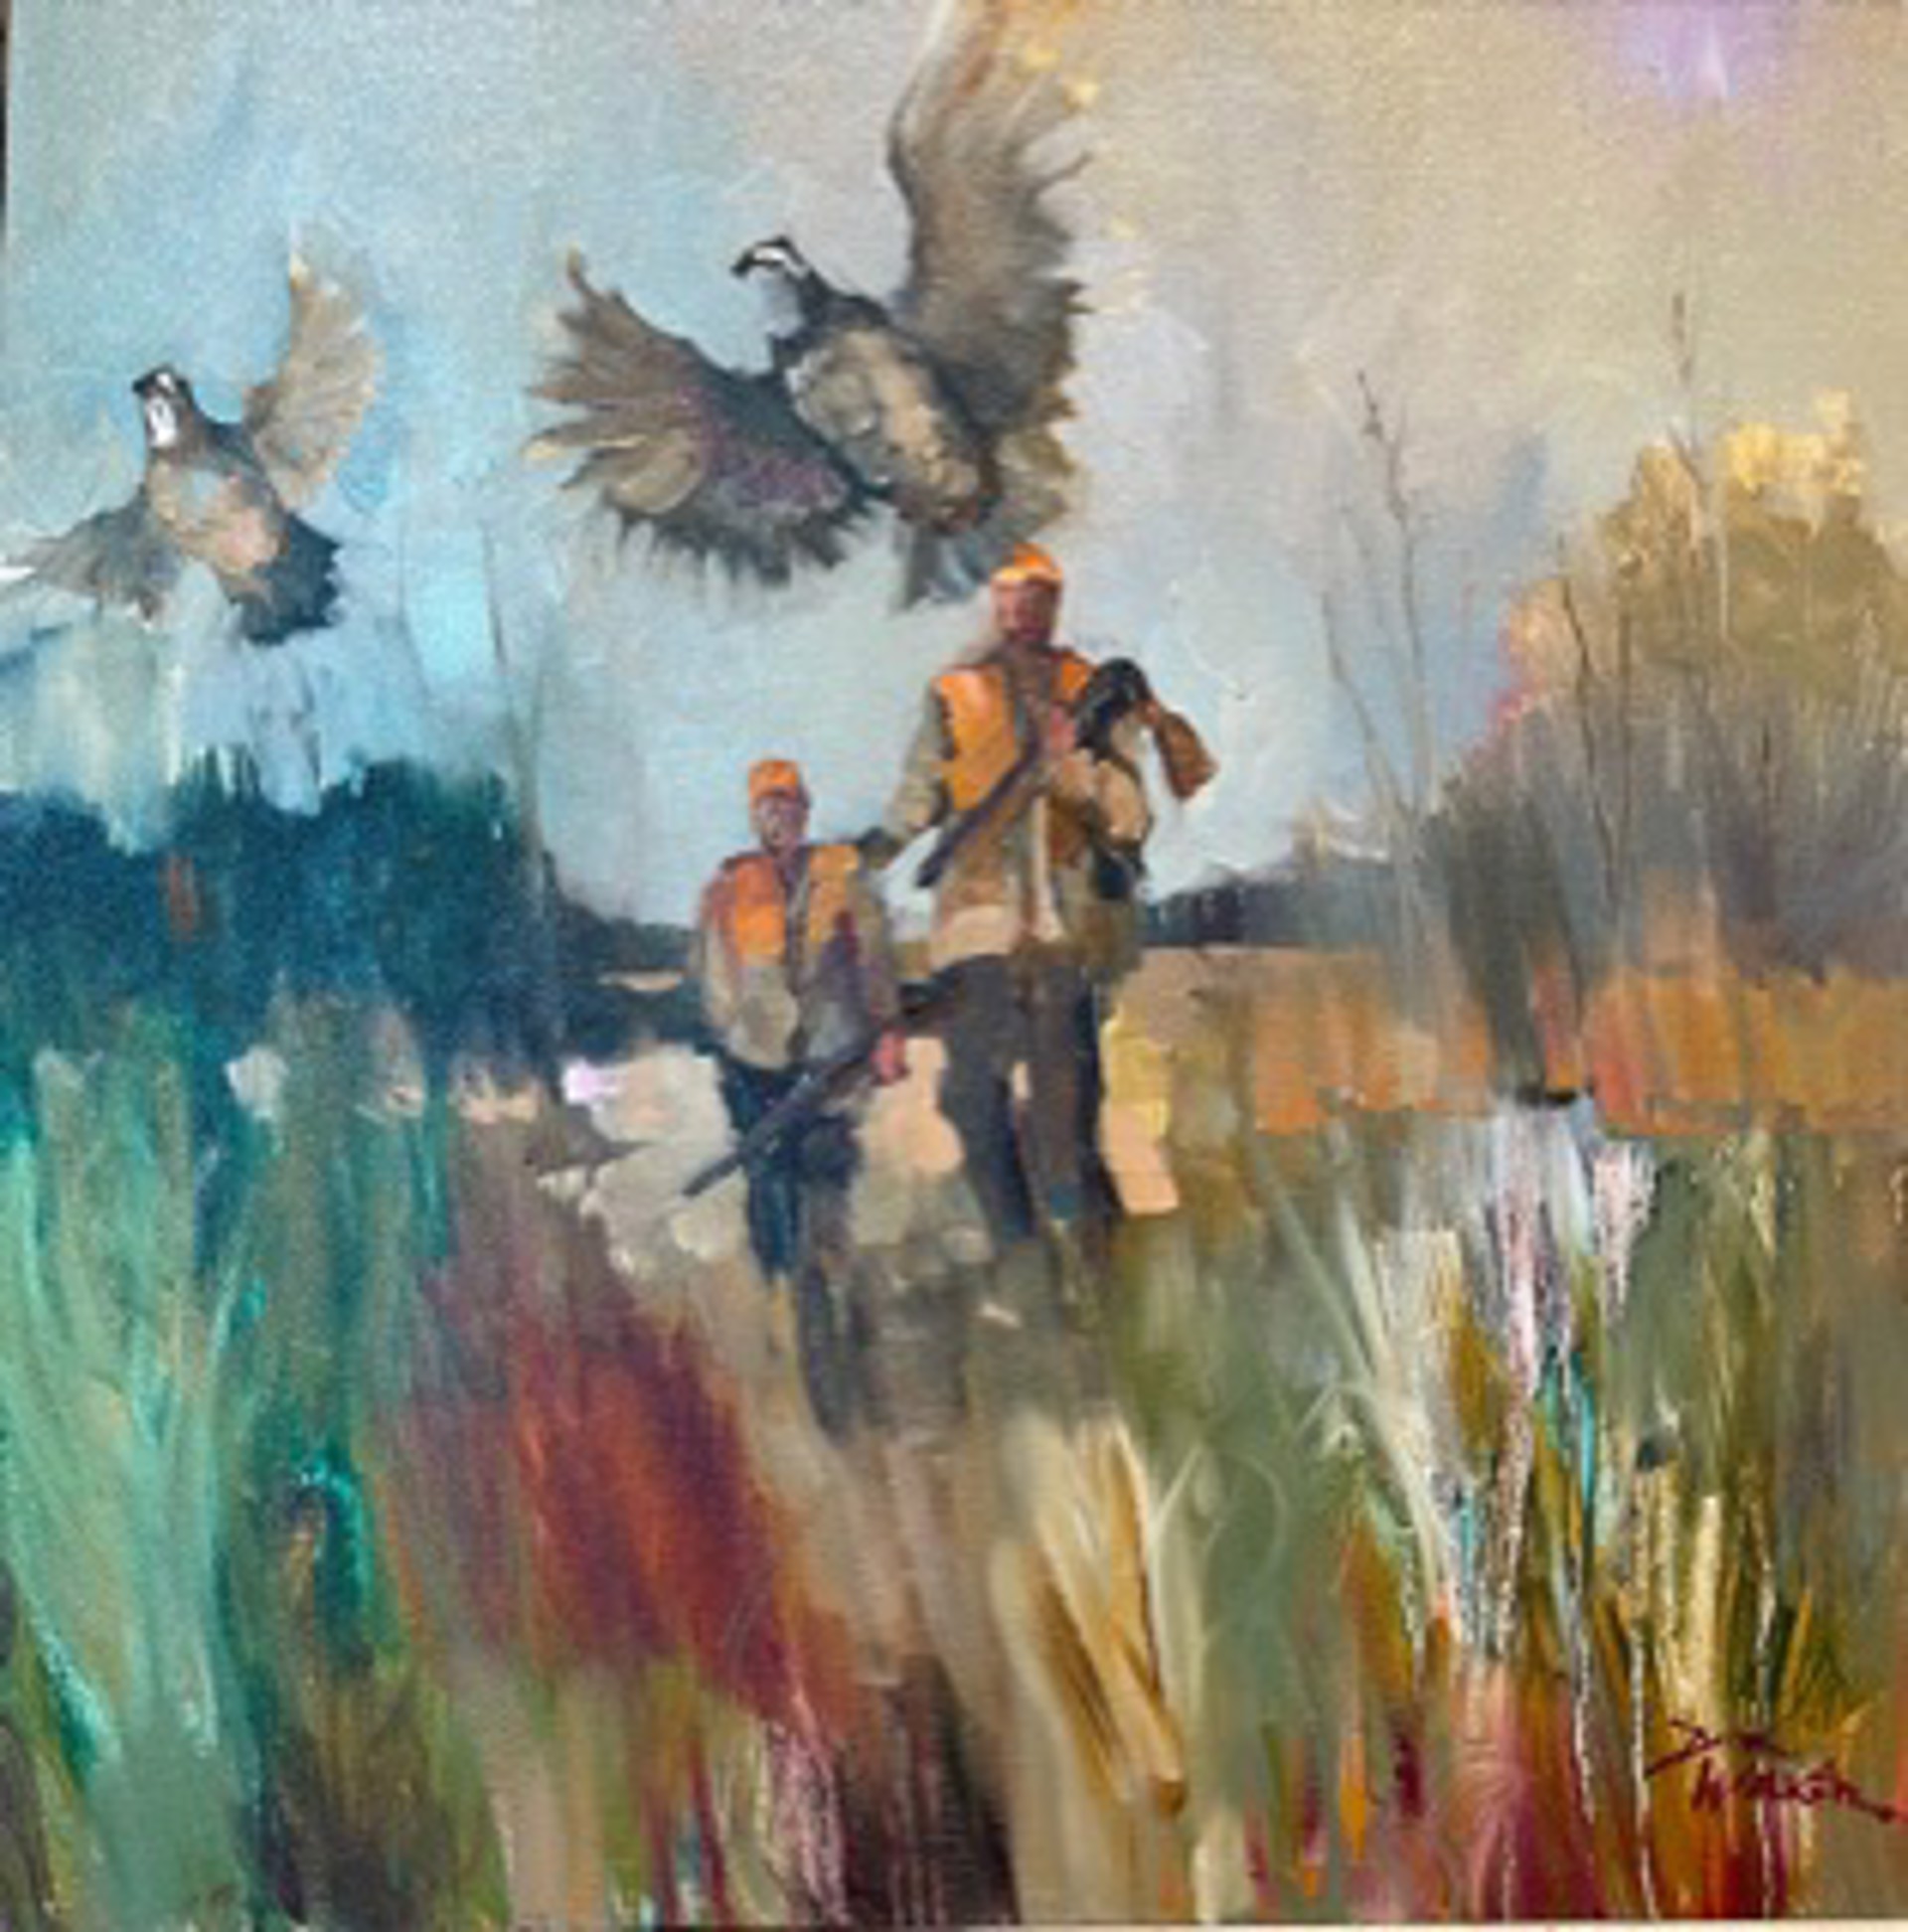 The Best of Times - Father & Son Quail Hunt by Dirk Walker